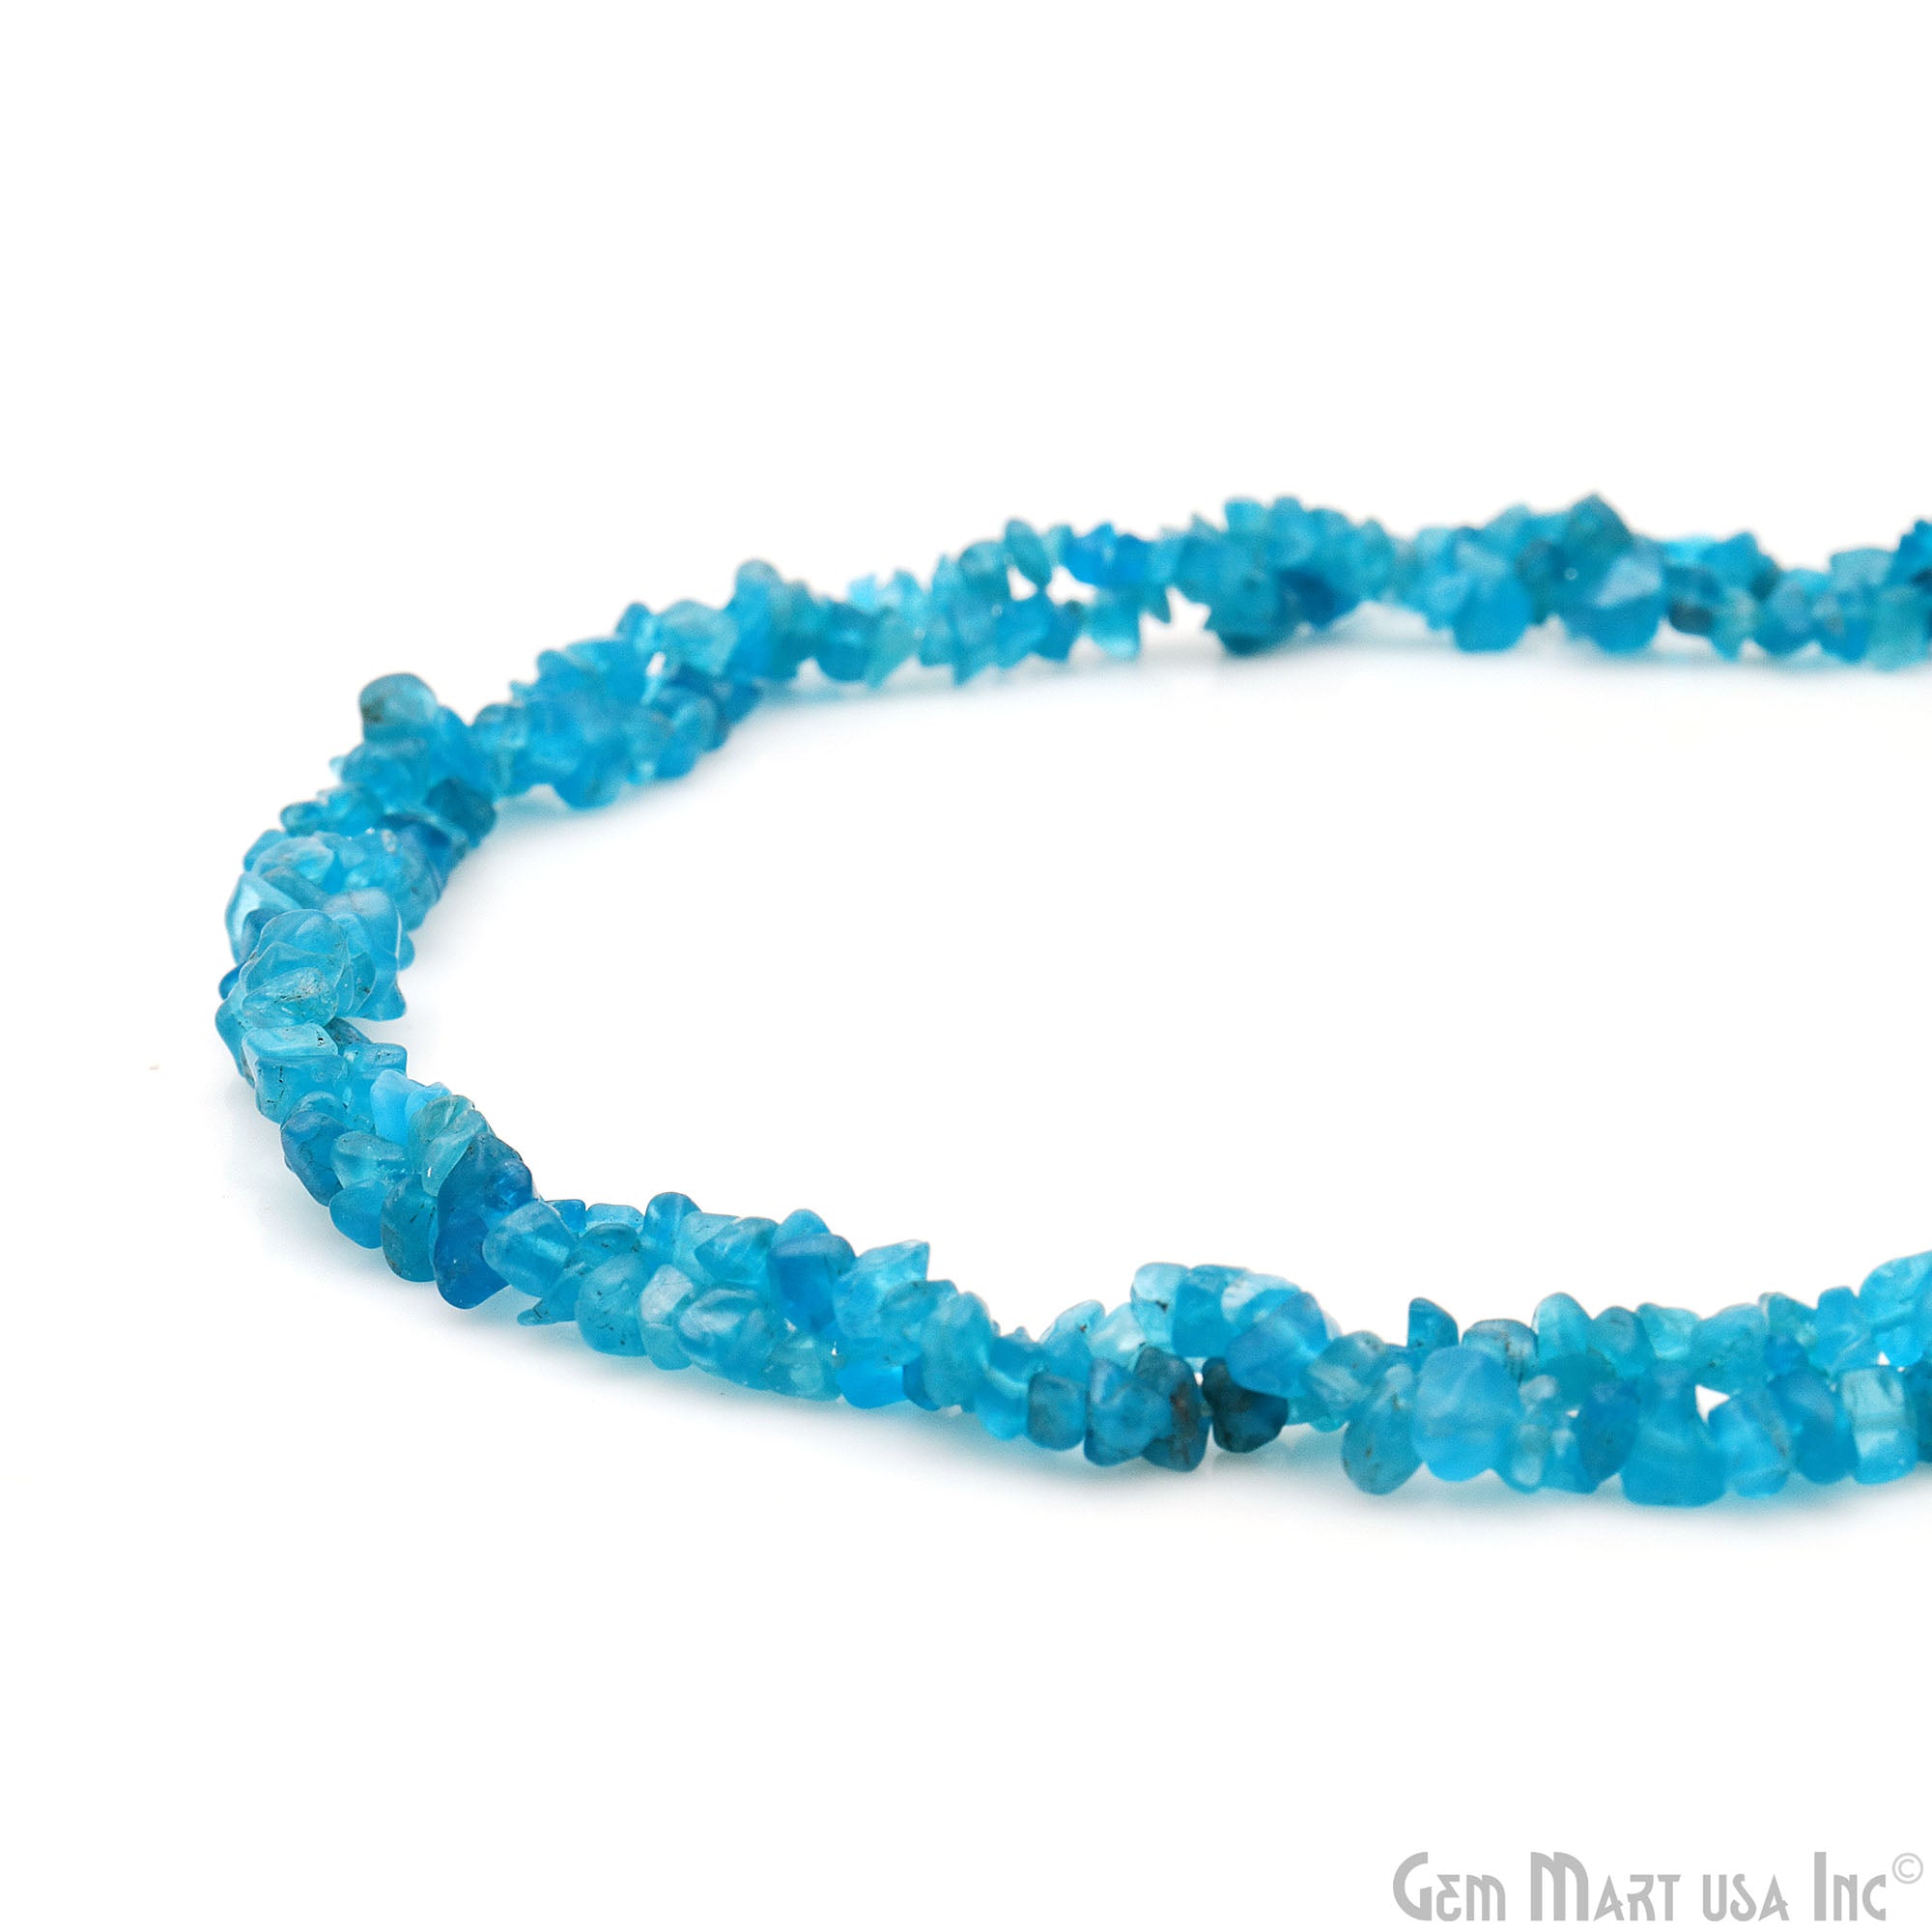 Neon Apatite Chip Nugget Beads 34 inch Full Strand (762221494319)